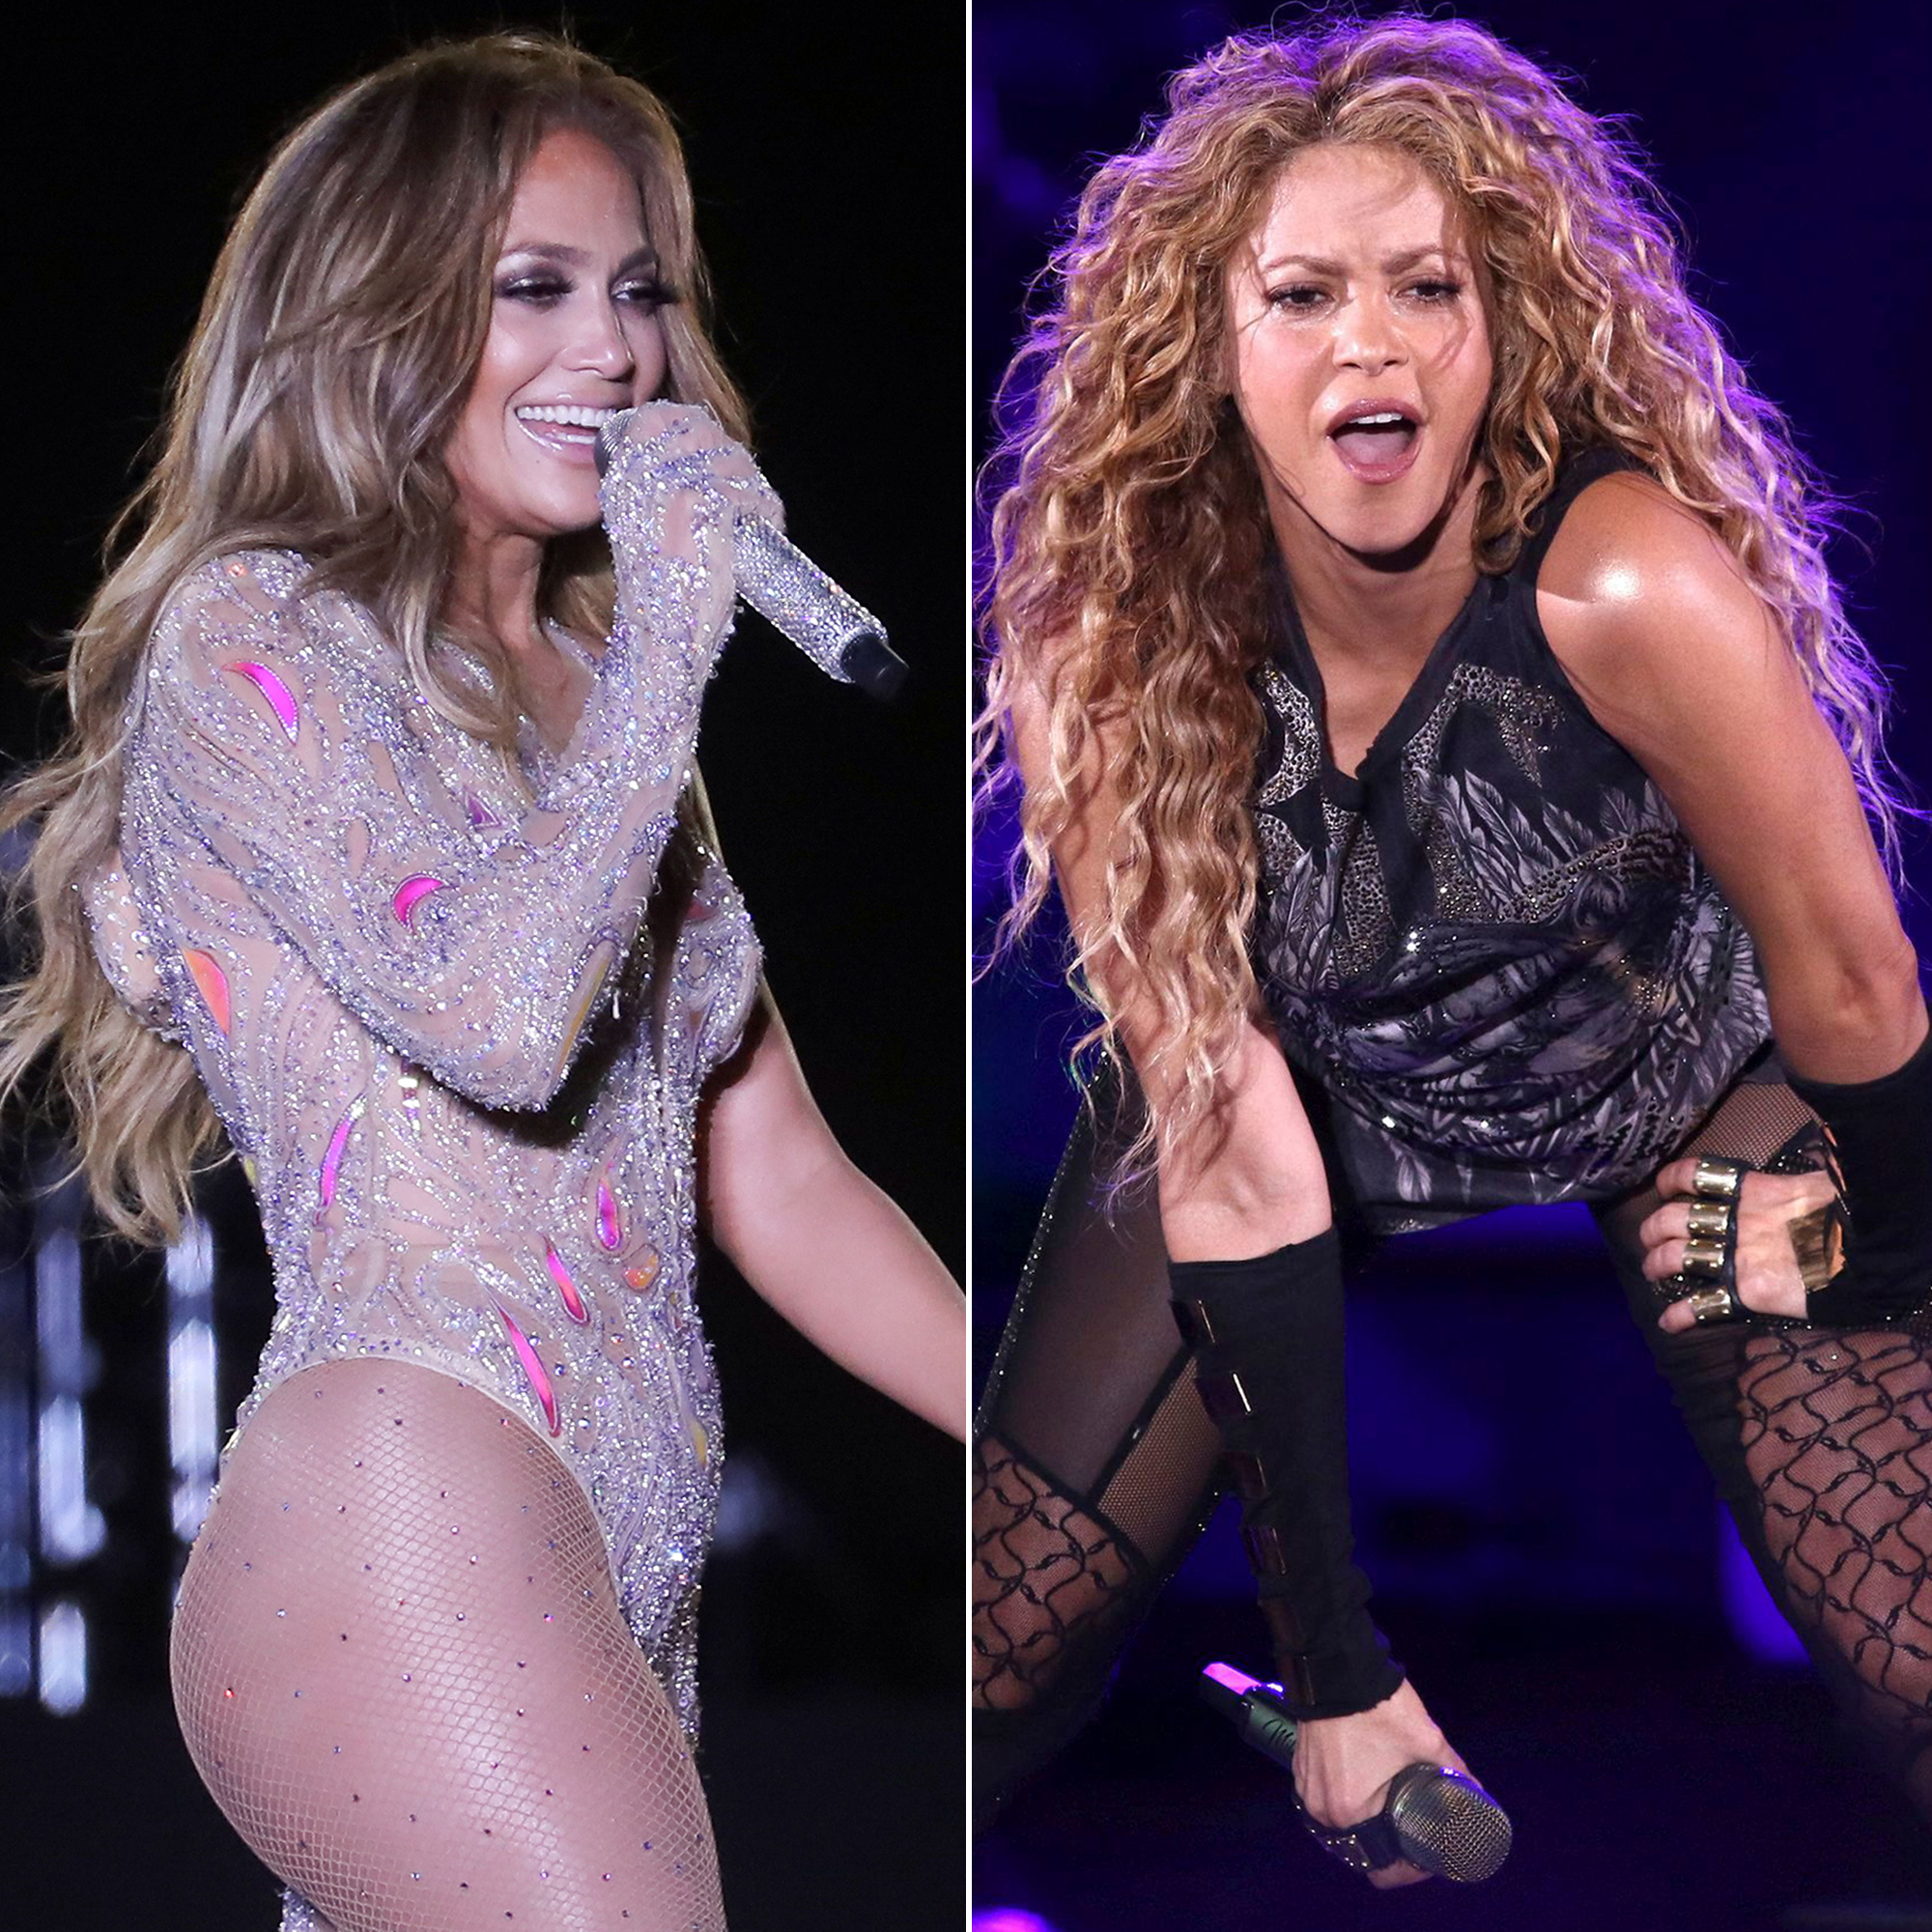 Shakira and JLo's Super Bowl halftime show is the most viewed